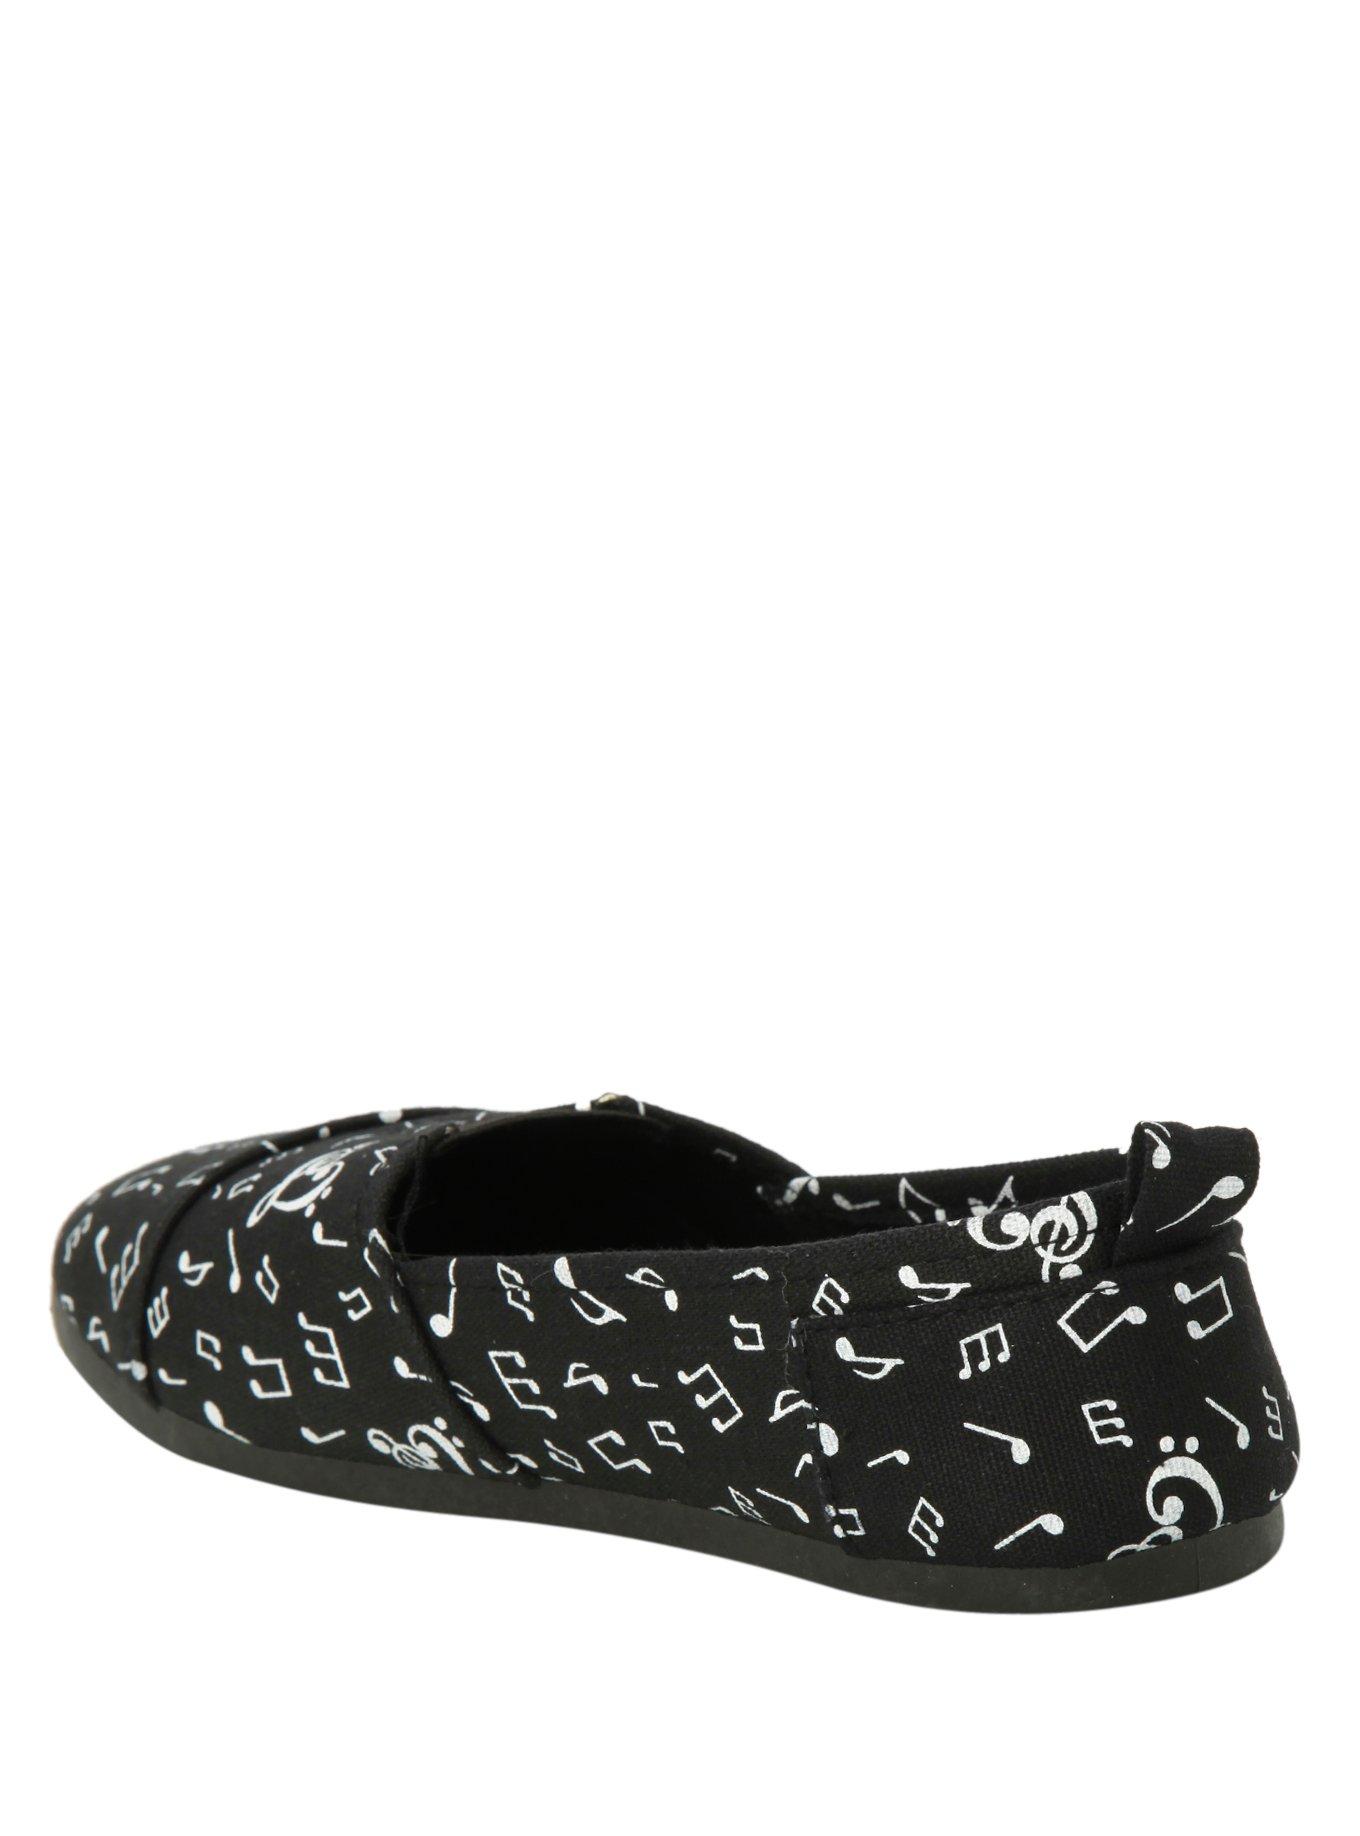 Music Clef Hearts & Notes Slip-Ons, BLACK, alternate